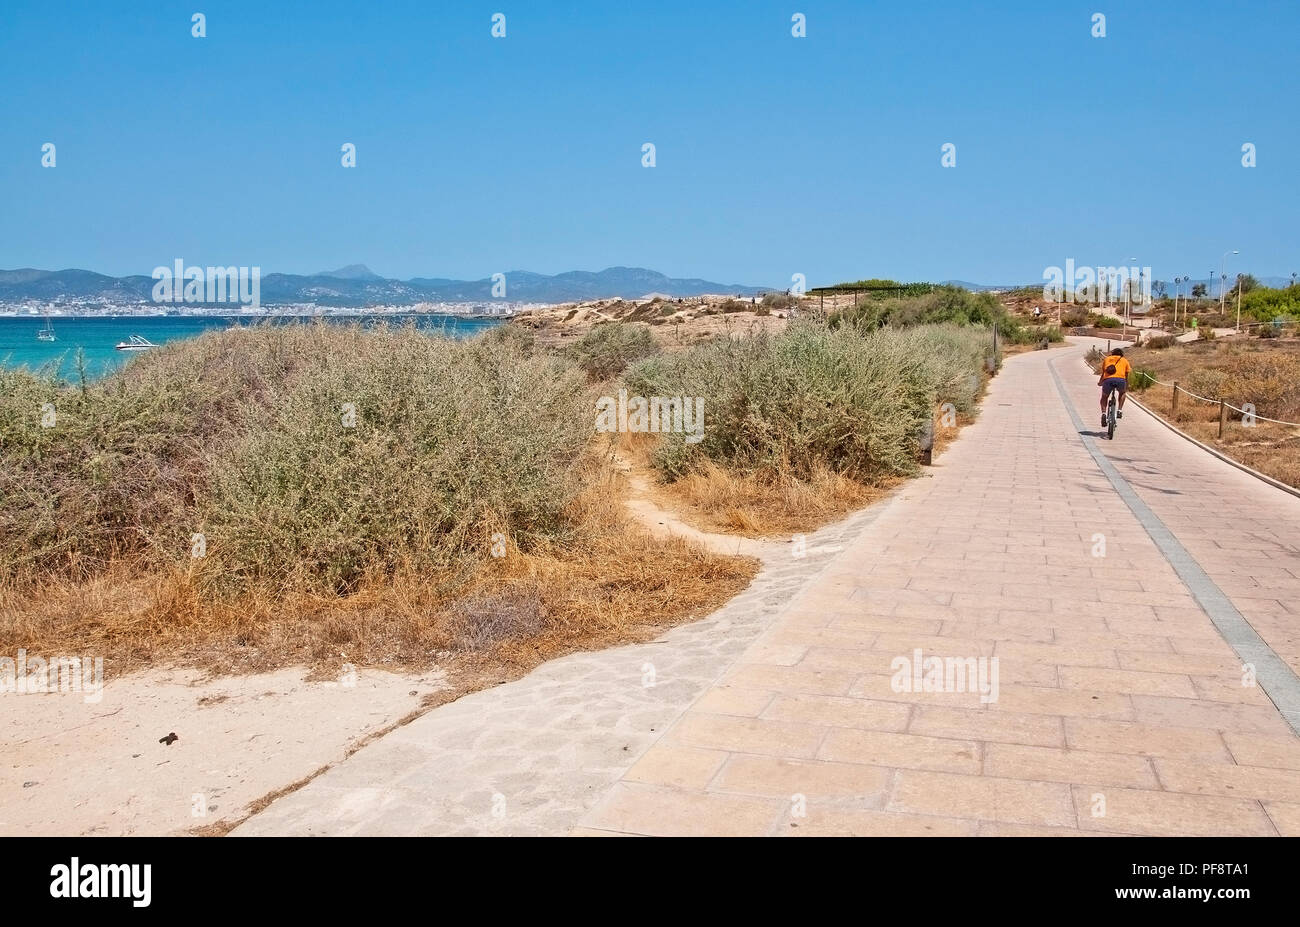 PALMA DE MALLORCA, SPAIN - JULY 21, 2012: Bicyclist in orange cycling along the track through coastal dry herb landscape on July 21, 2012 in Mallorca, Stock Photo